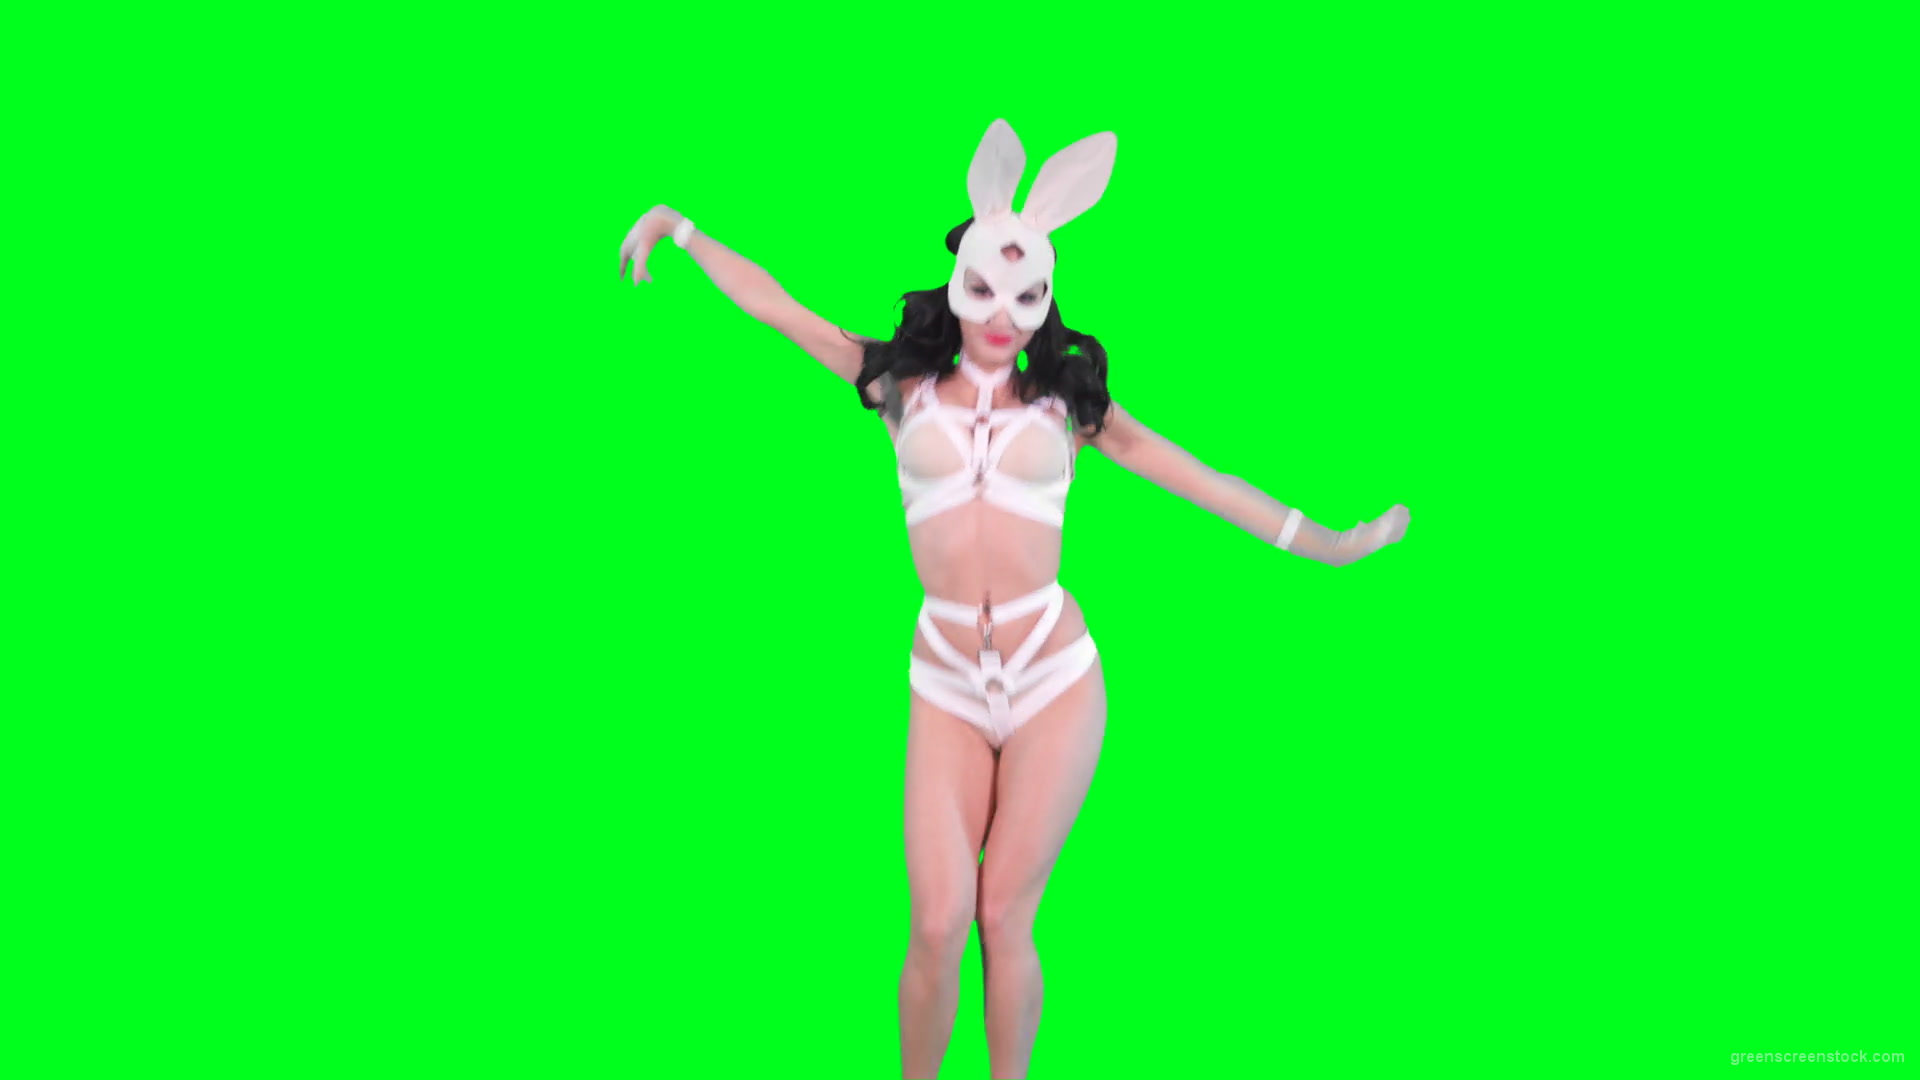 Go-go-Dancer-in-White-Rabbit-EDM-fetish-costume-making-sexy-moves-on-green-screen-4K-video-footage-1920_007 Green Screen Stock